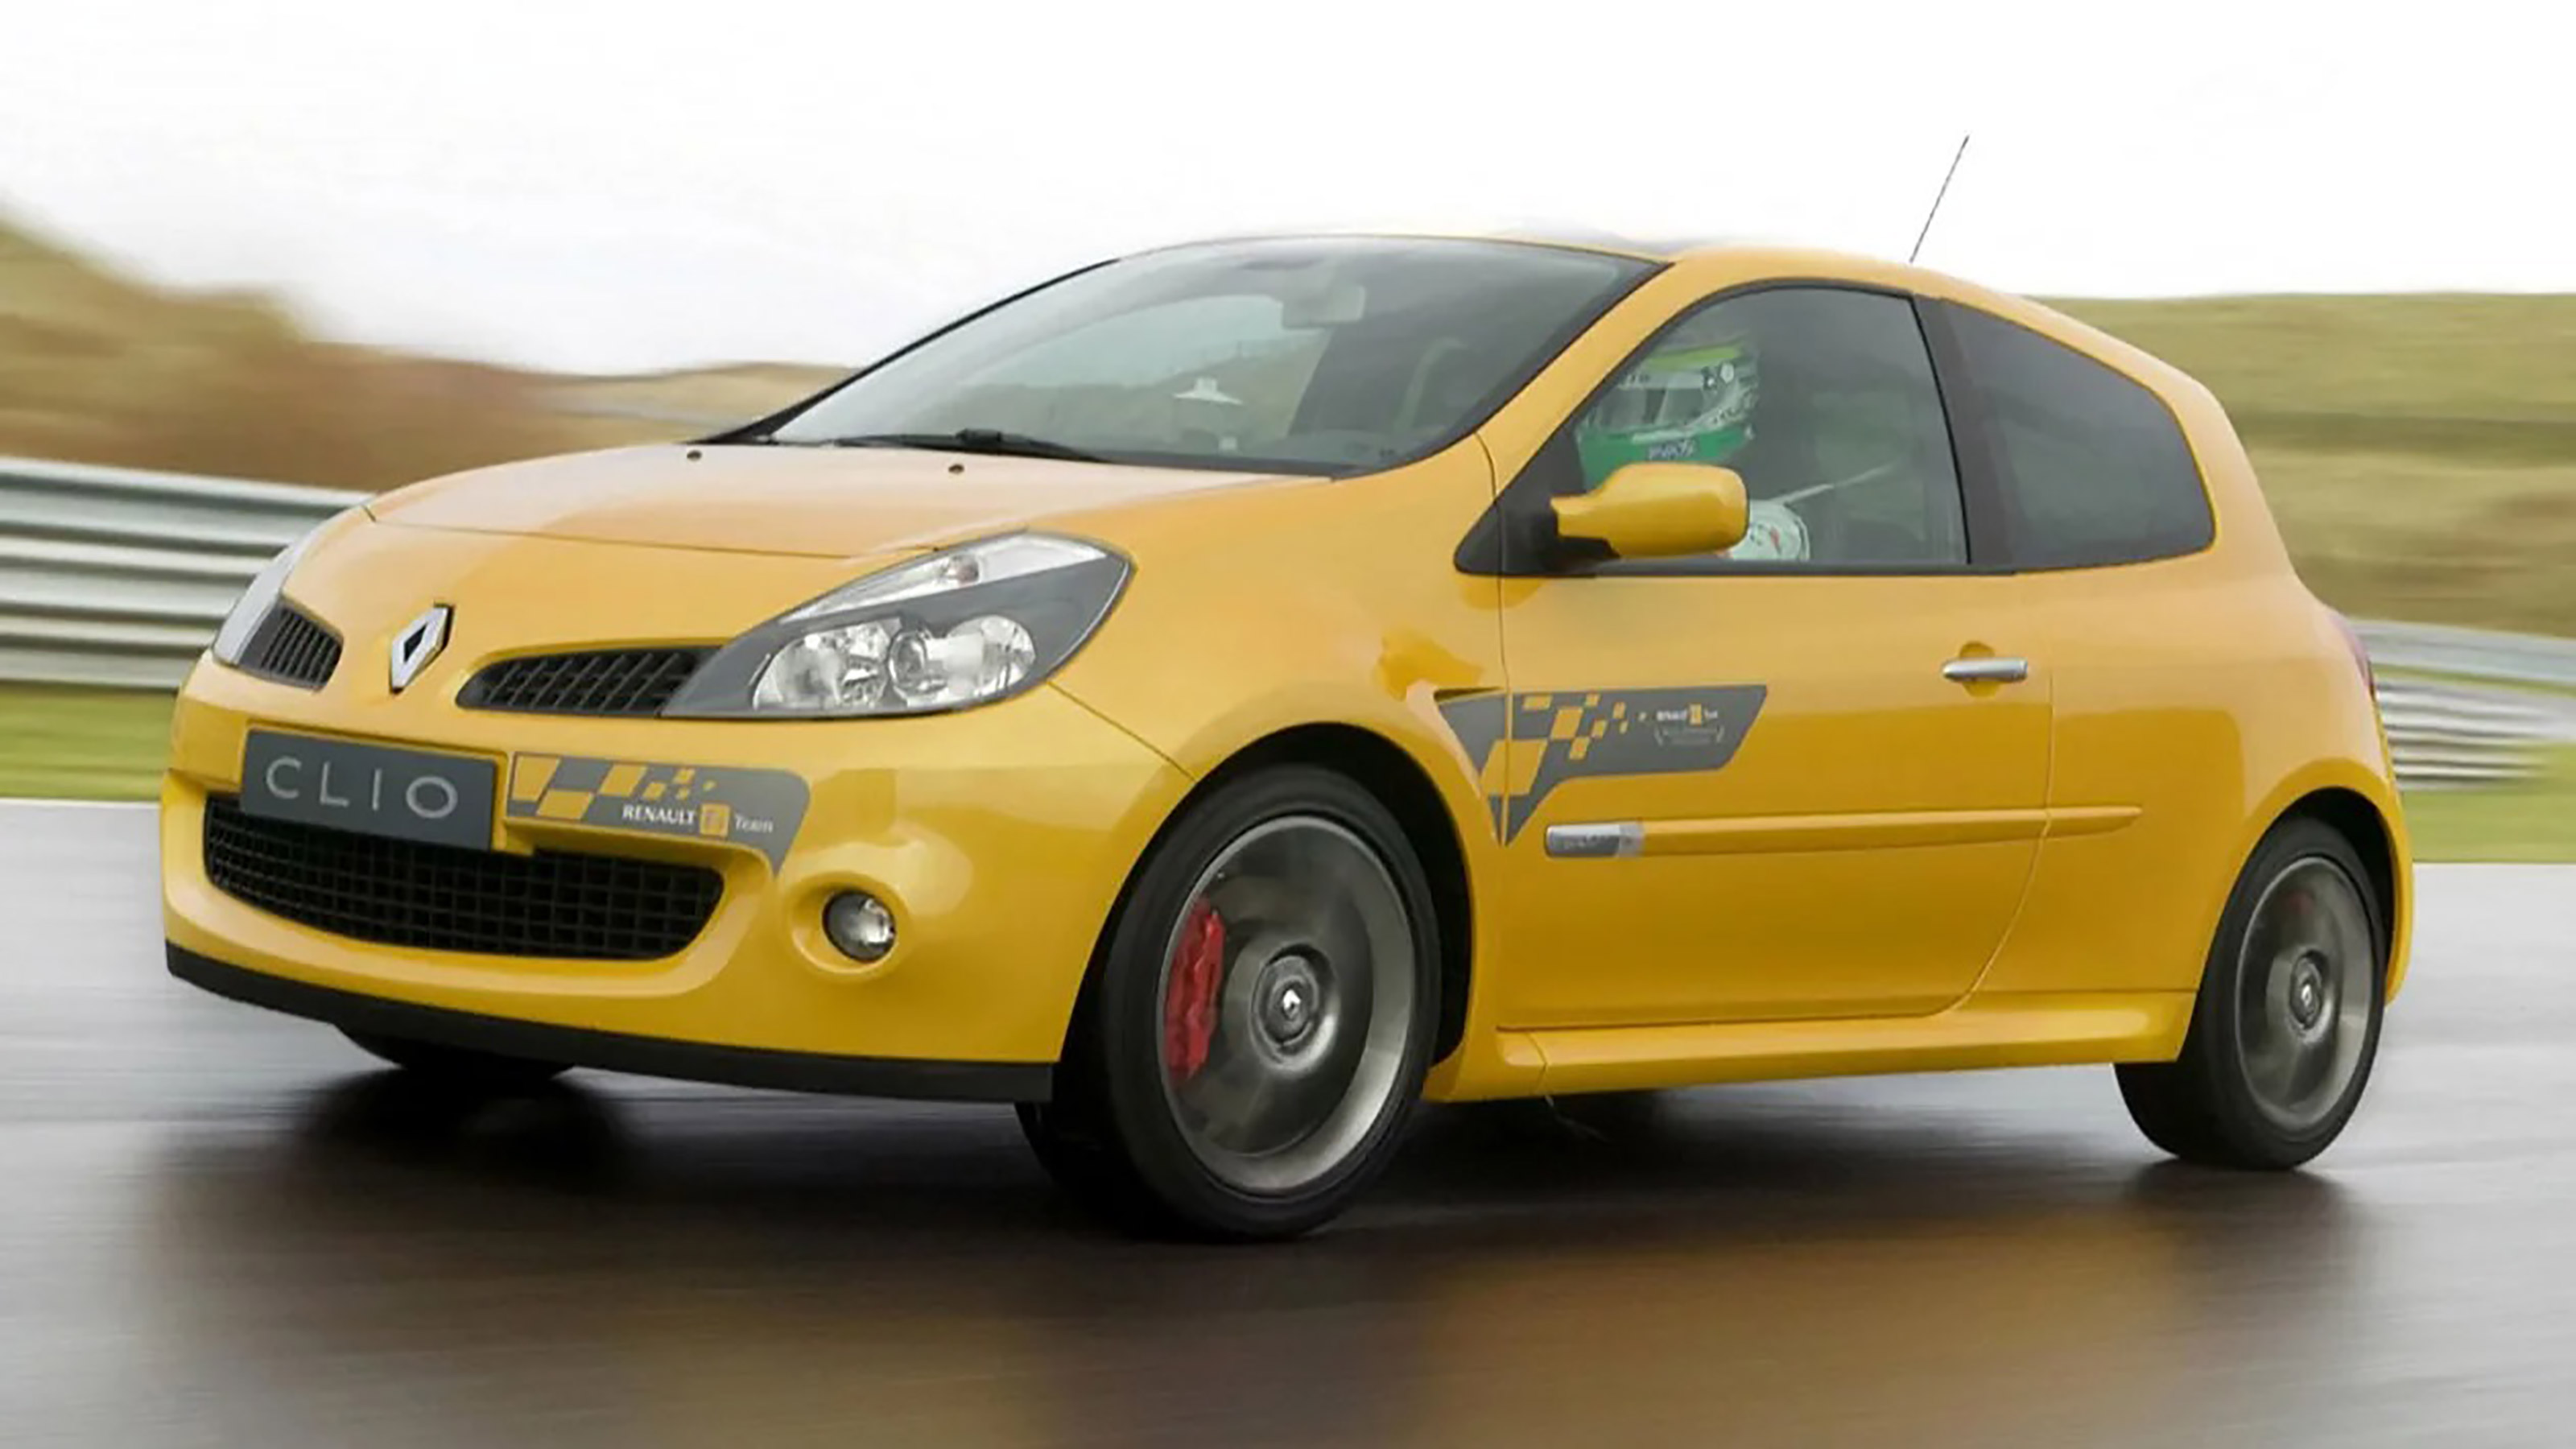 Renaultsport Clio 197/200 buying guide